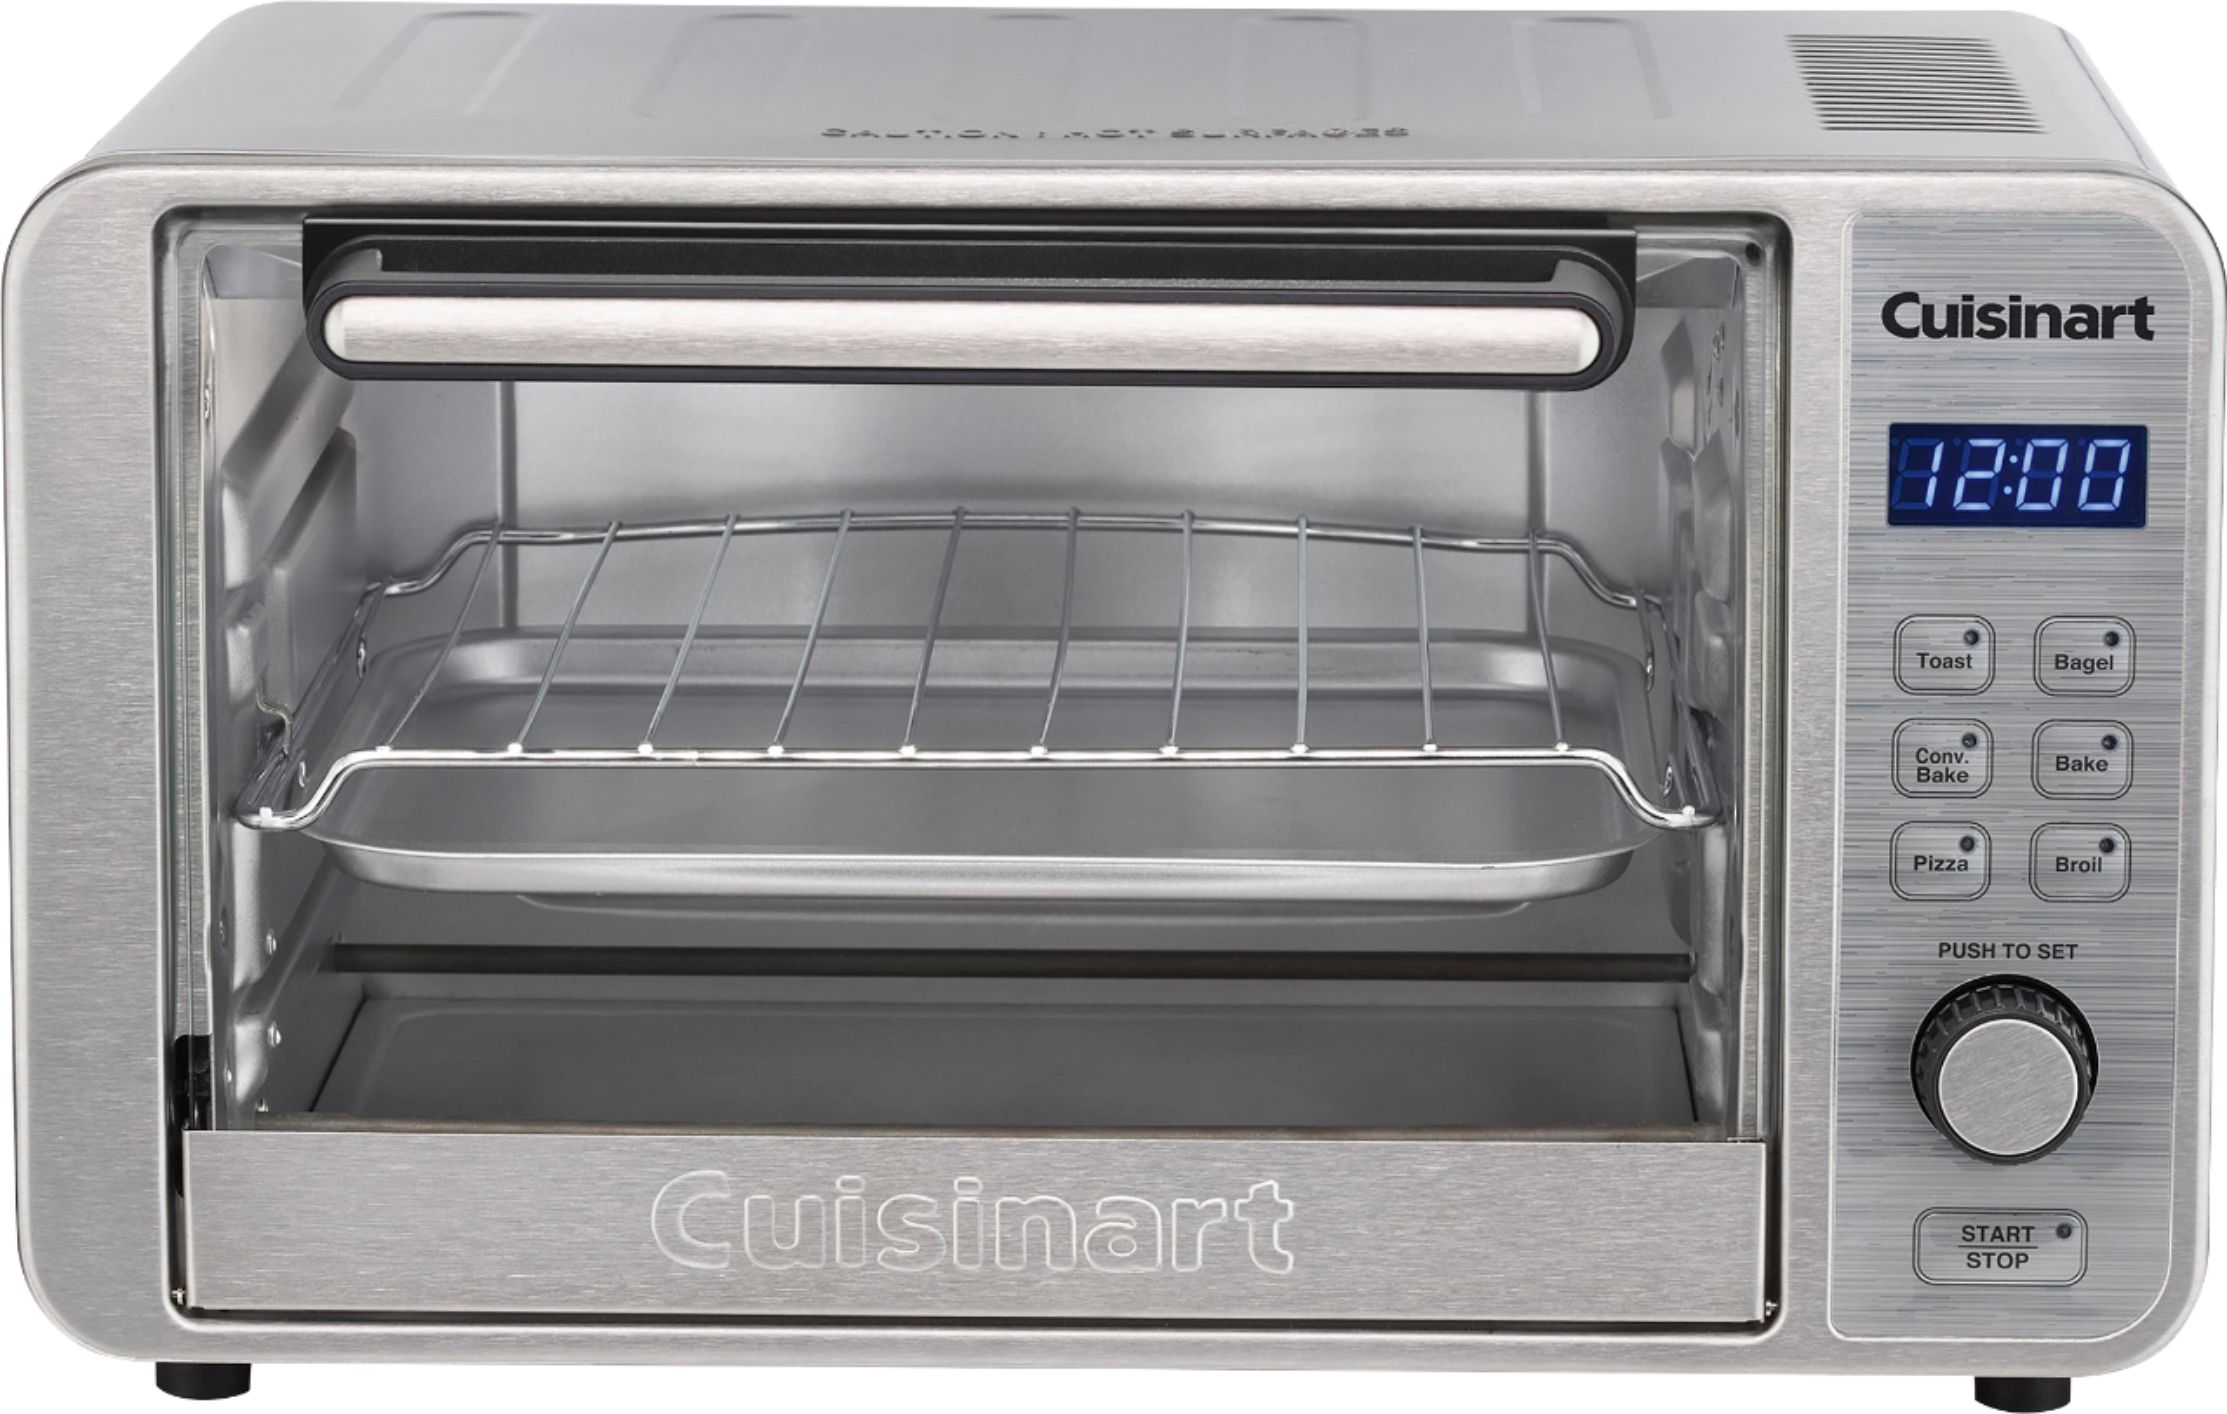 convection toaster oven air fryer